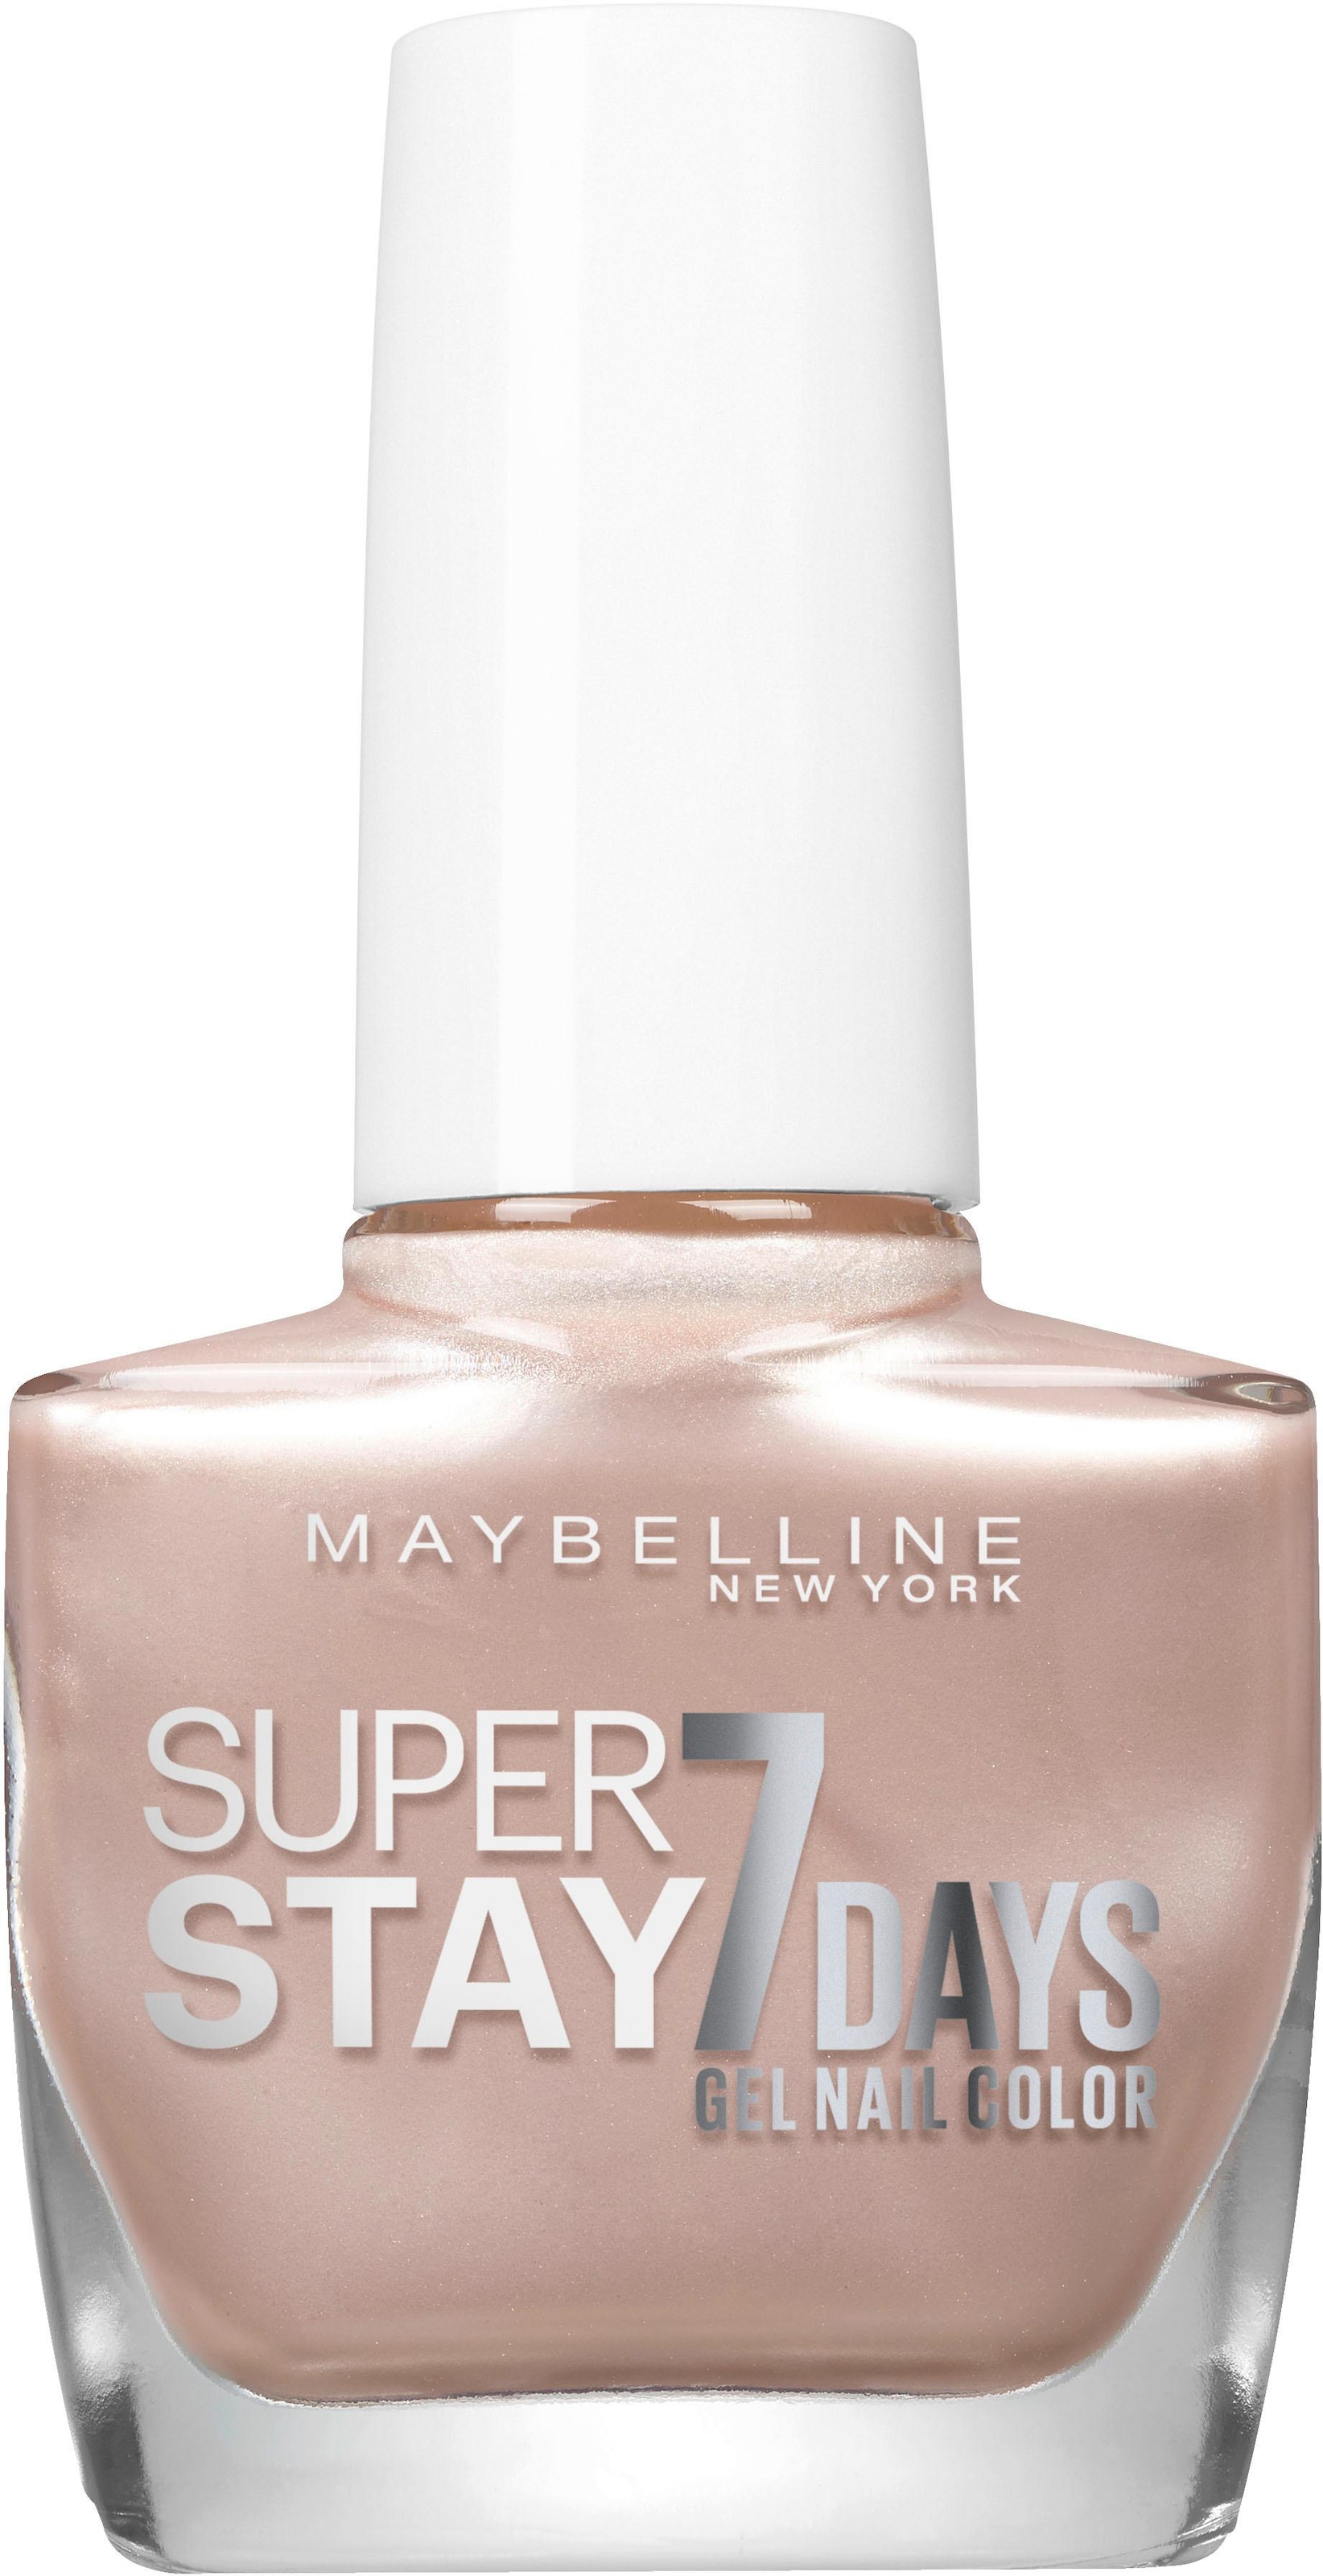 MAYBELLINE NEW YORK Nagellack City ♕ Nudes« 7 Tage »Superstay bei